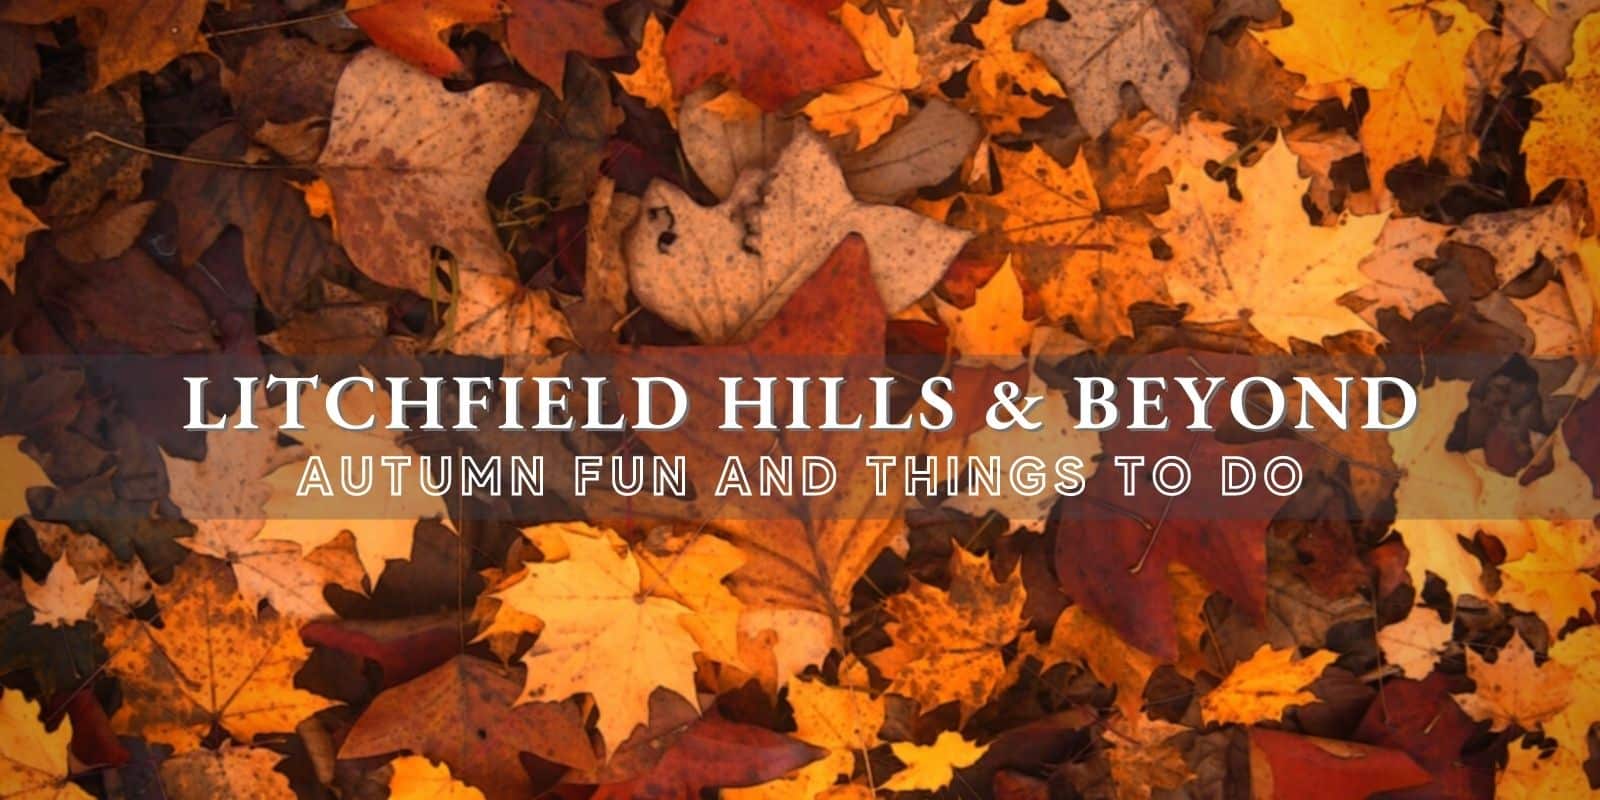 Litchfield Hills and Beyond: Autumn Fun and Things to Do